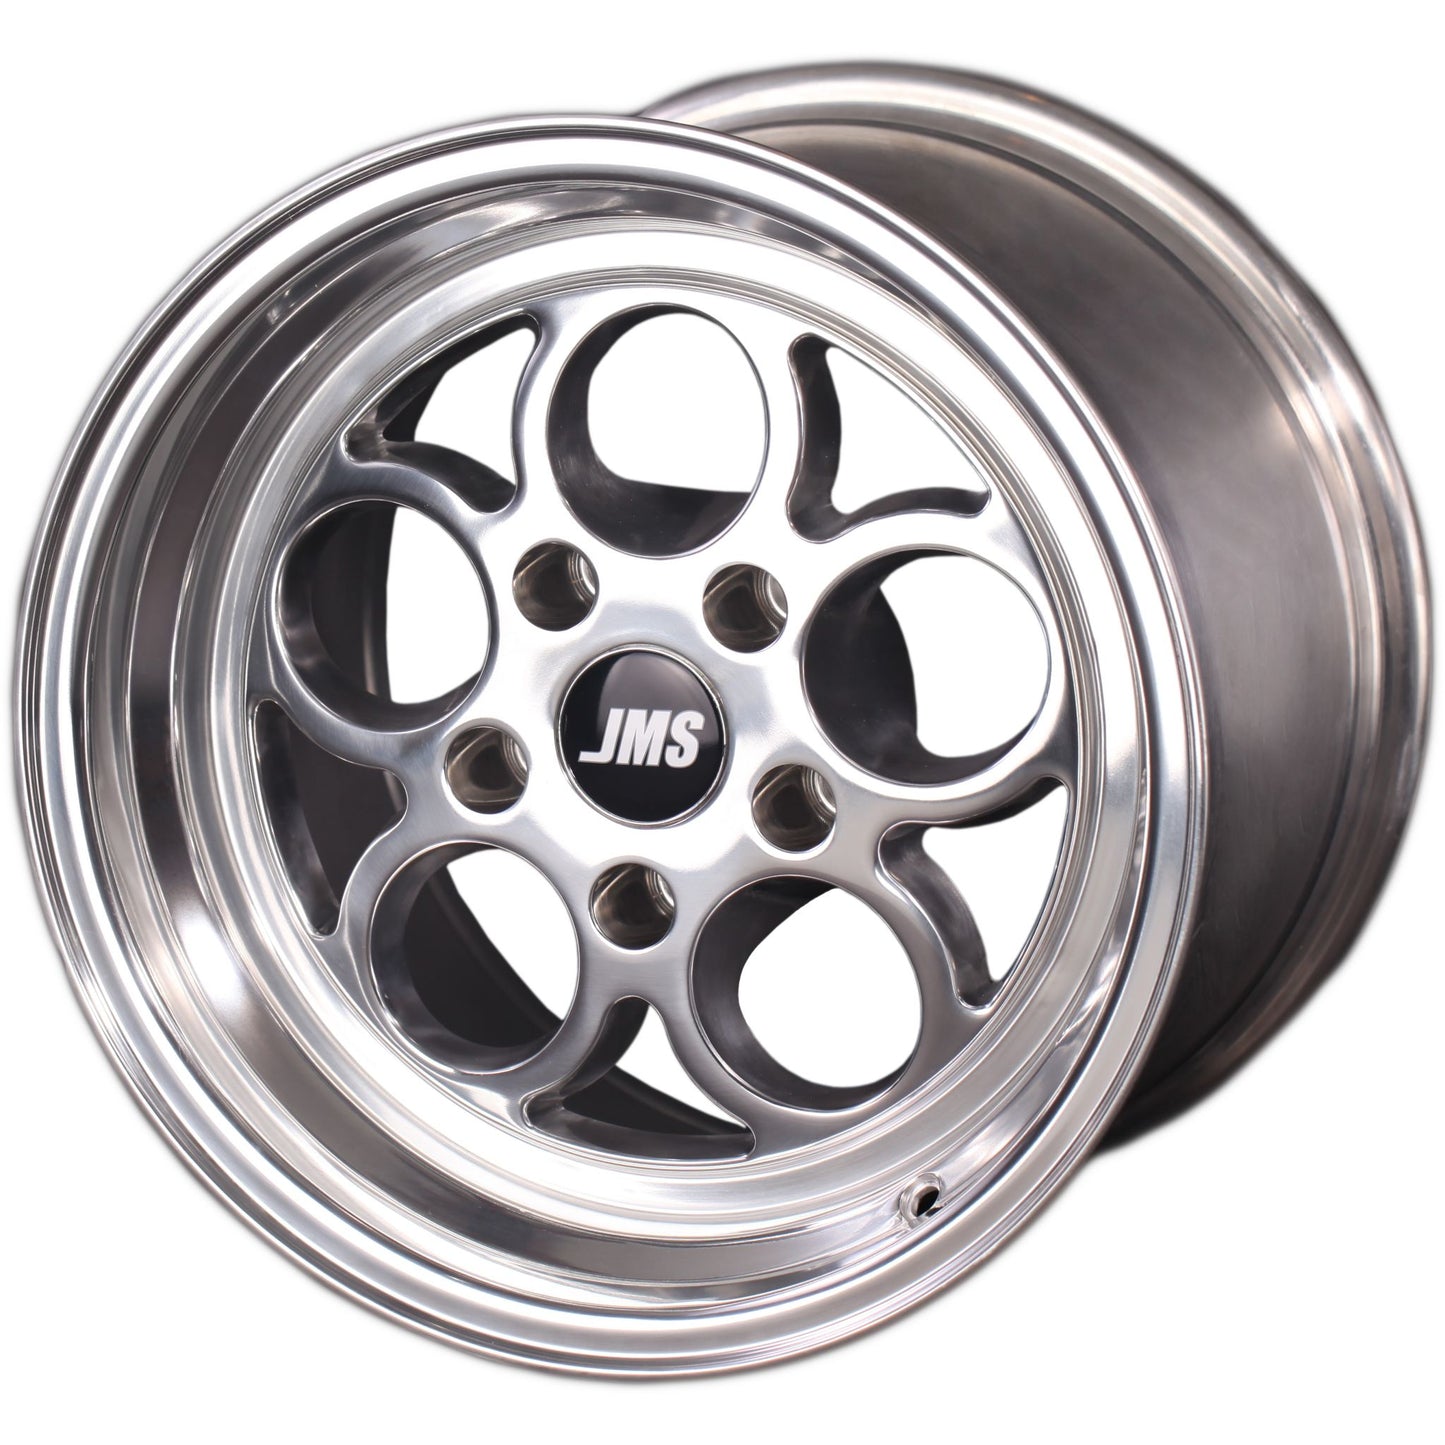 JMS Savage Series Race Wheels - Polished Finish; 17 inch X 10 inch Rear Wheel w/ Lug Nuts -- Fits 2005-2021 Mustang GT V6 2.3L and 2007-2014 Shelby GT500 S1710721FP